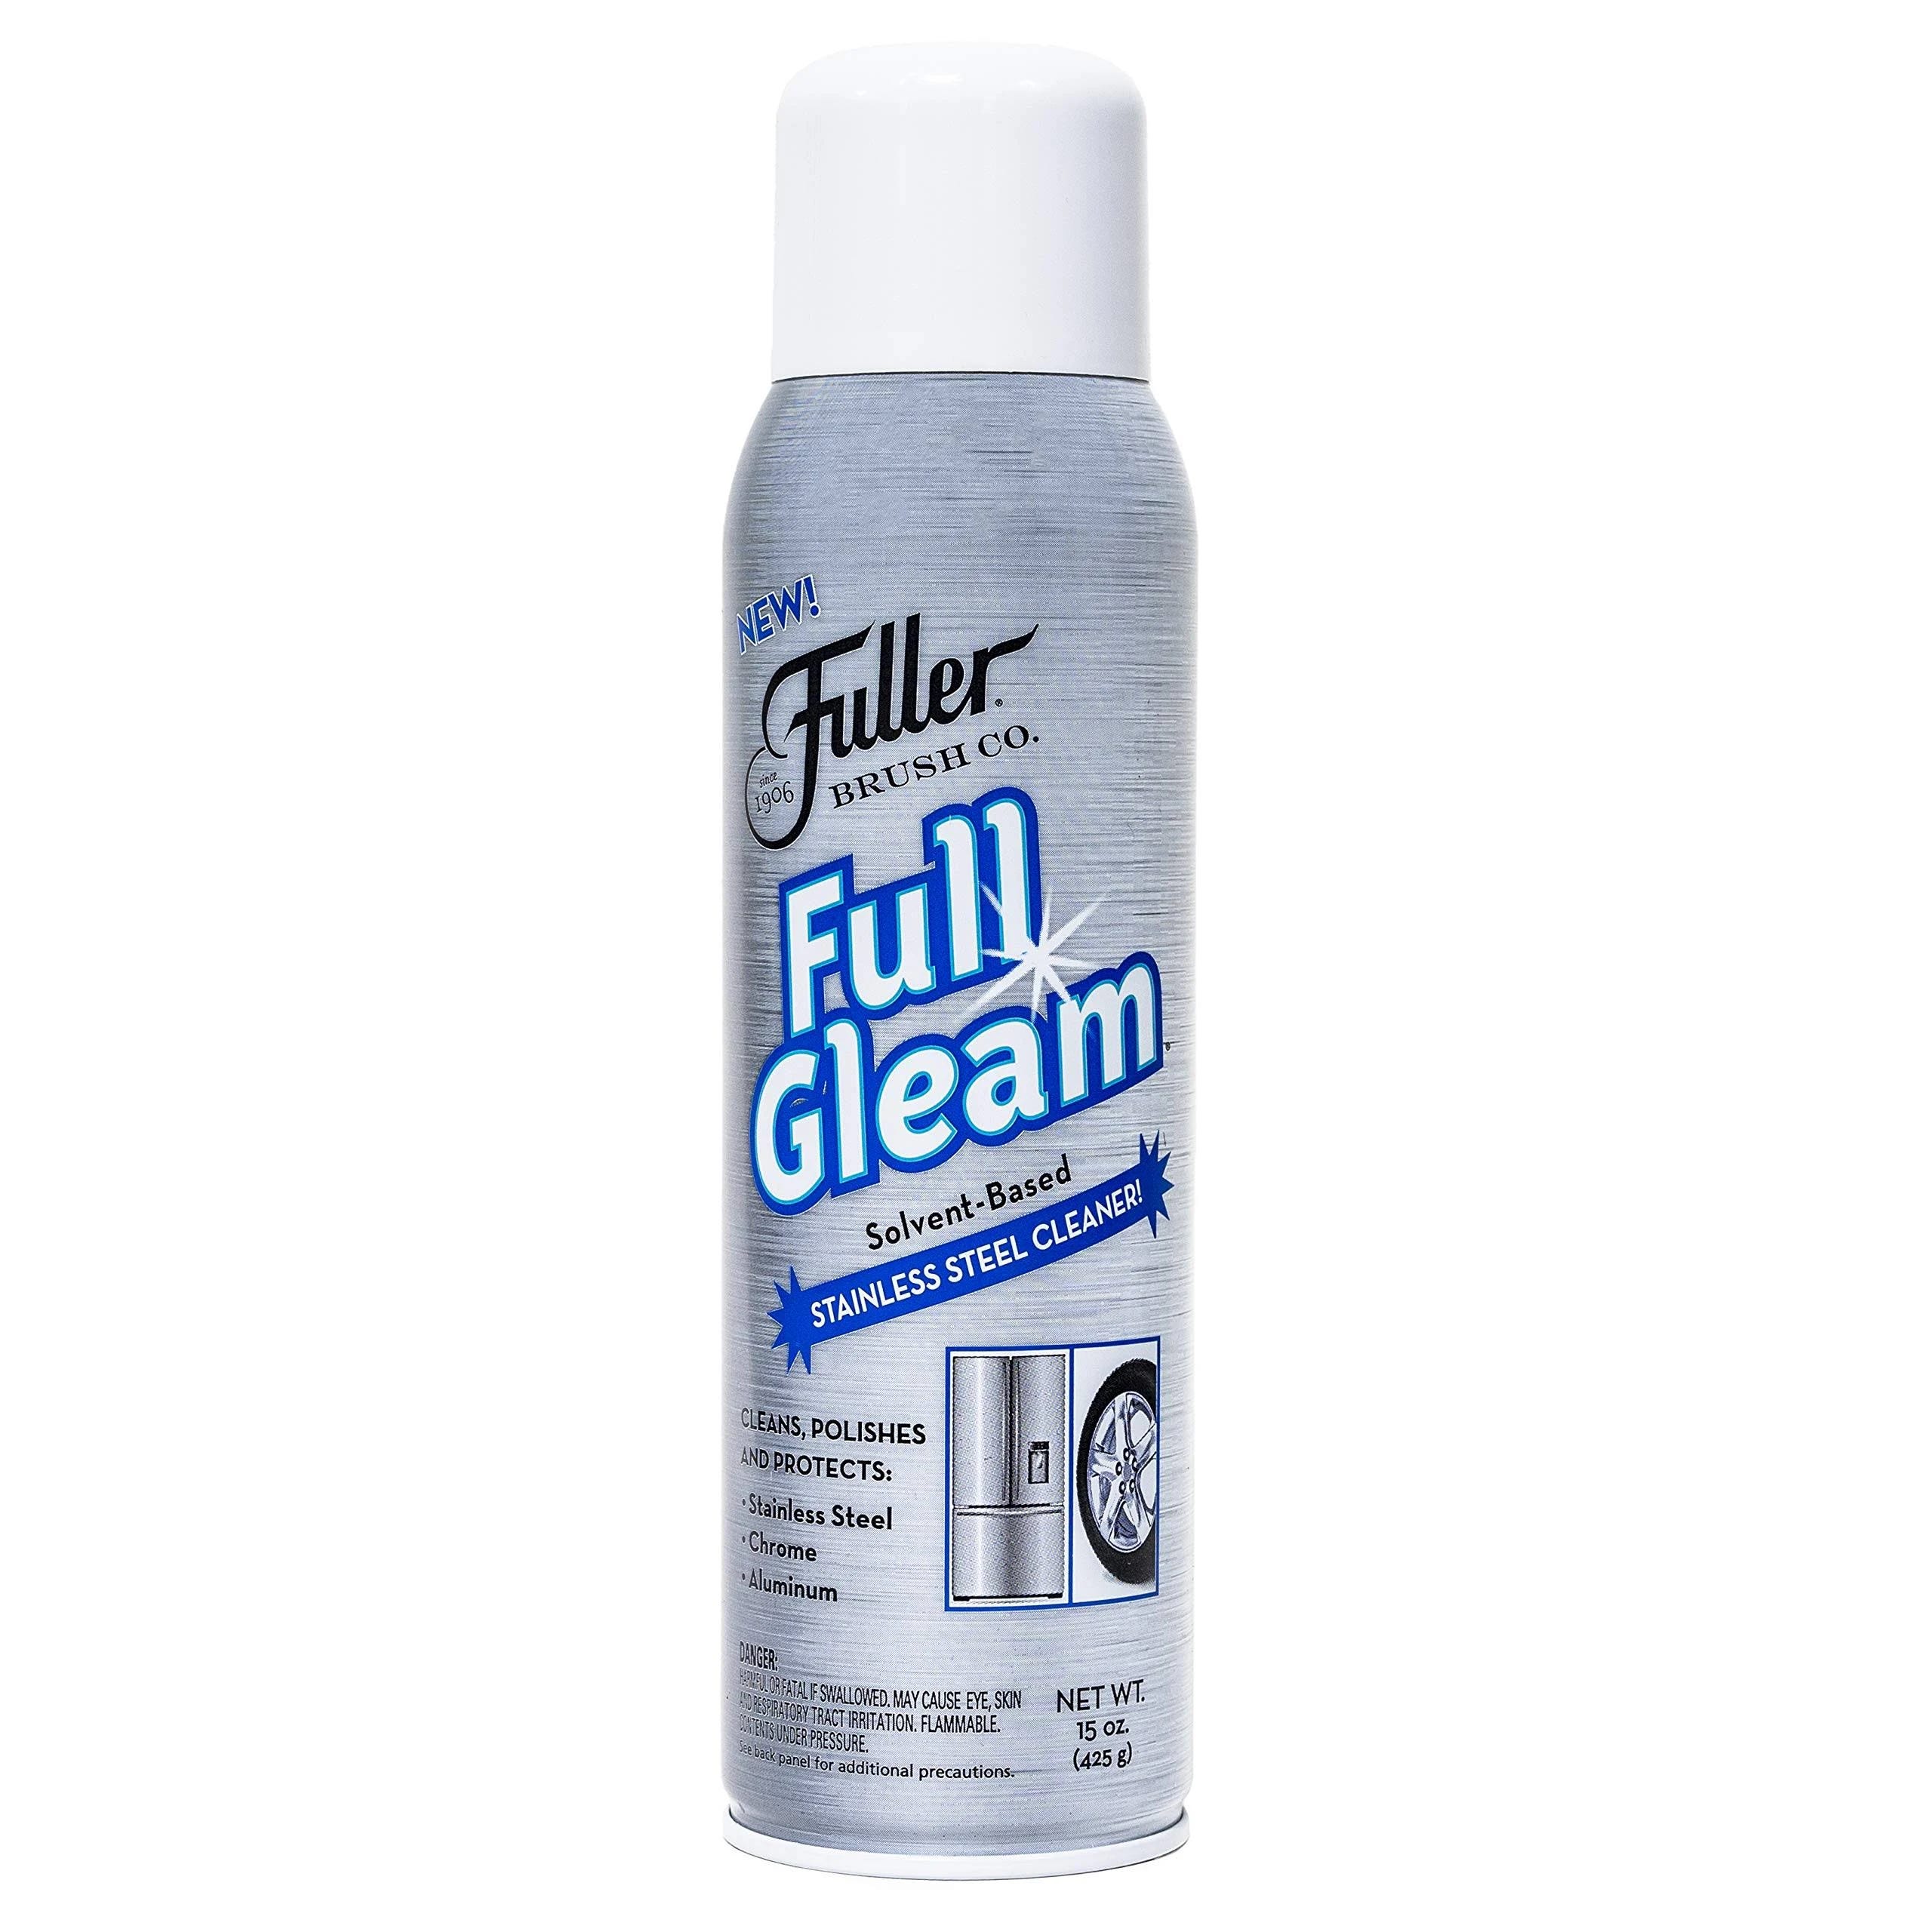 Full Gleam Stainless Steel Cleaner: Powerful Solvent-Based Formula for Shiny Surfaces | Image